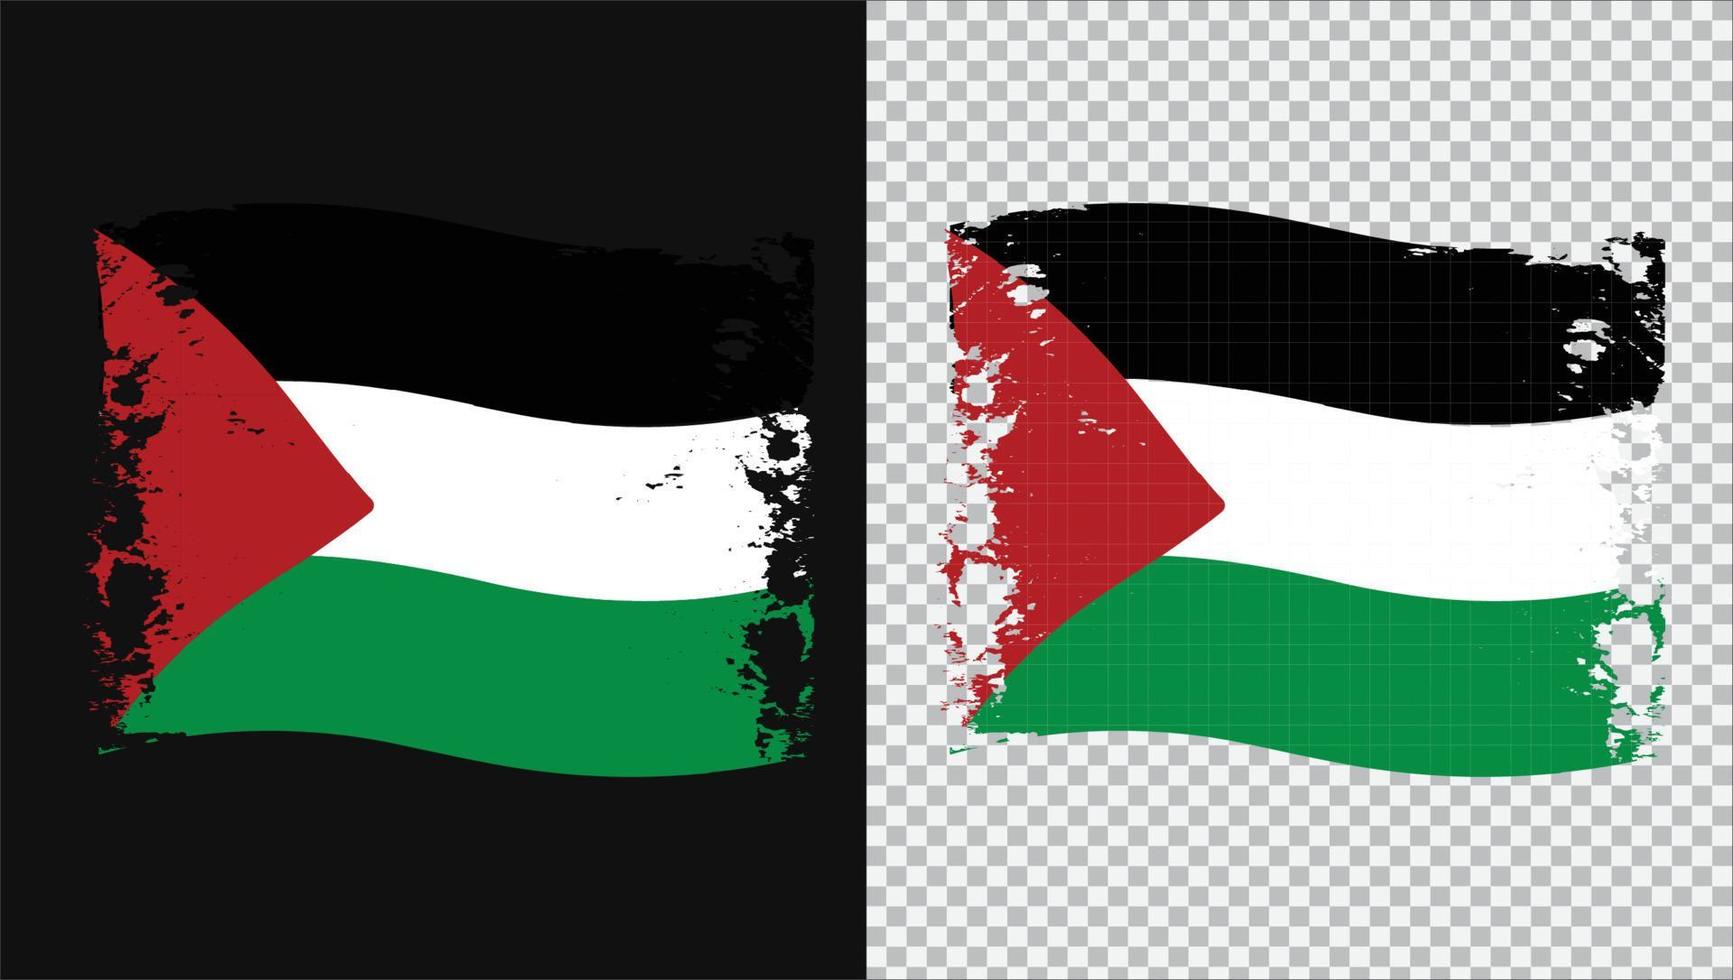 Palestine Flag Transparent With Watercolor Paint Brush vector